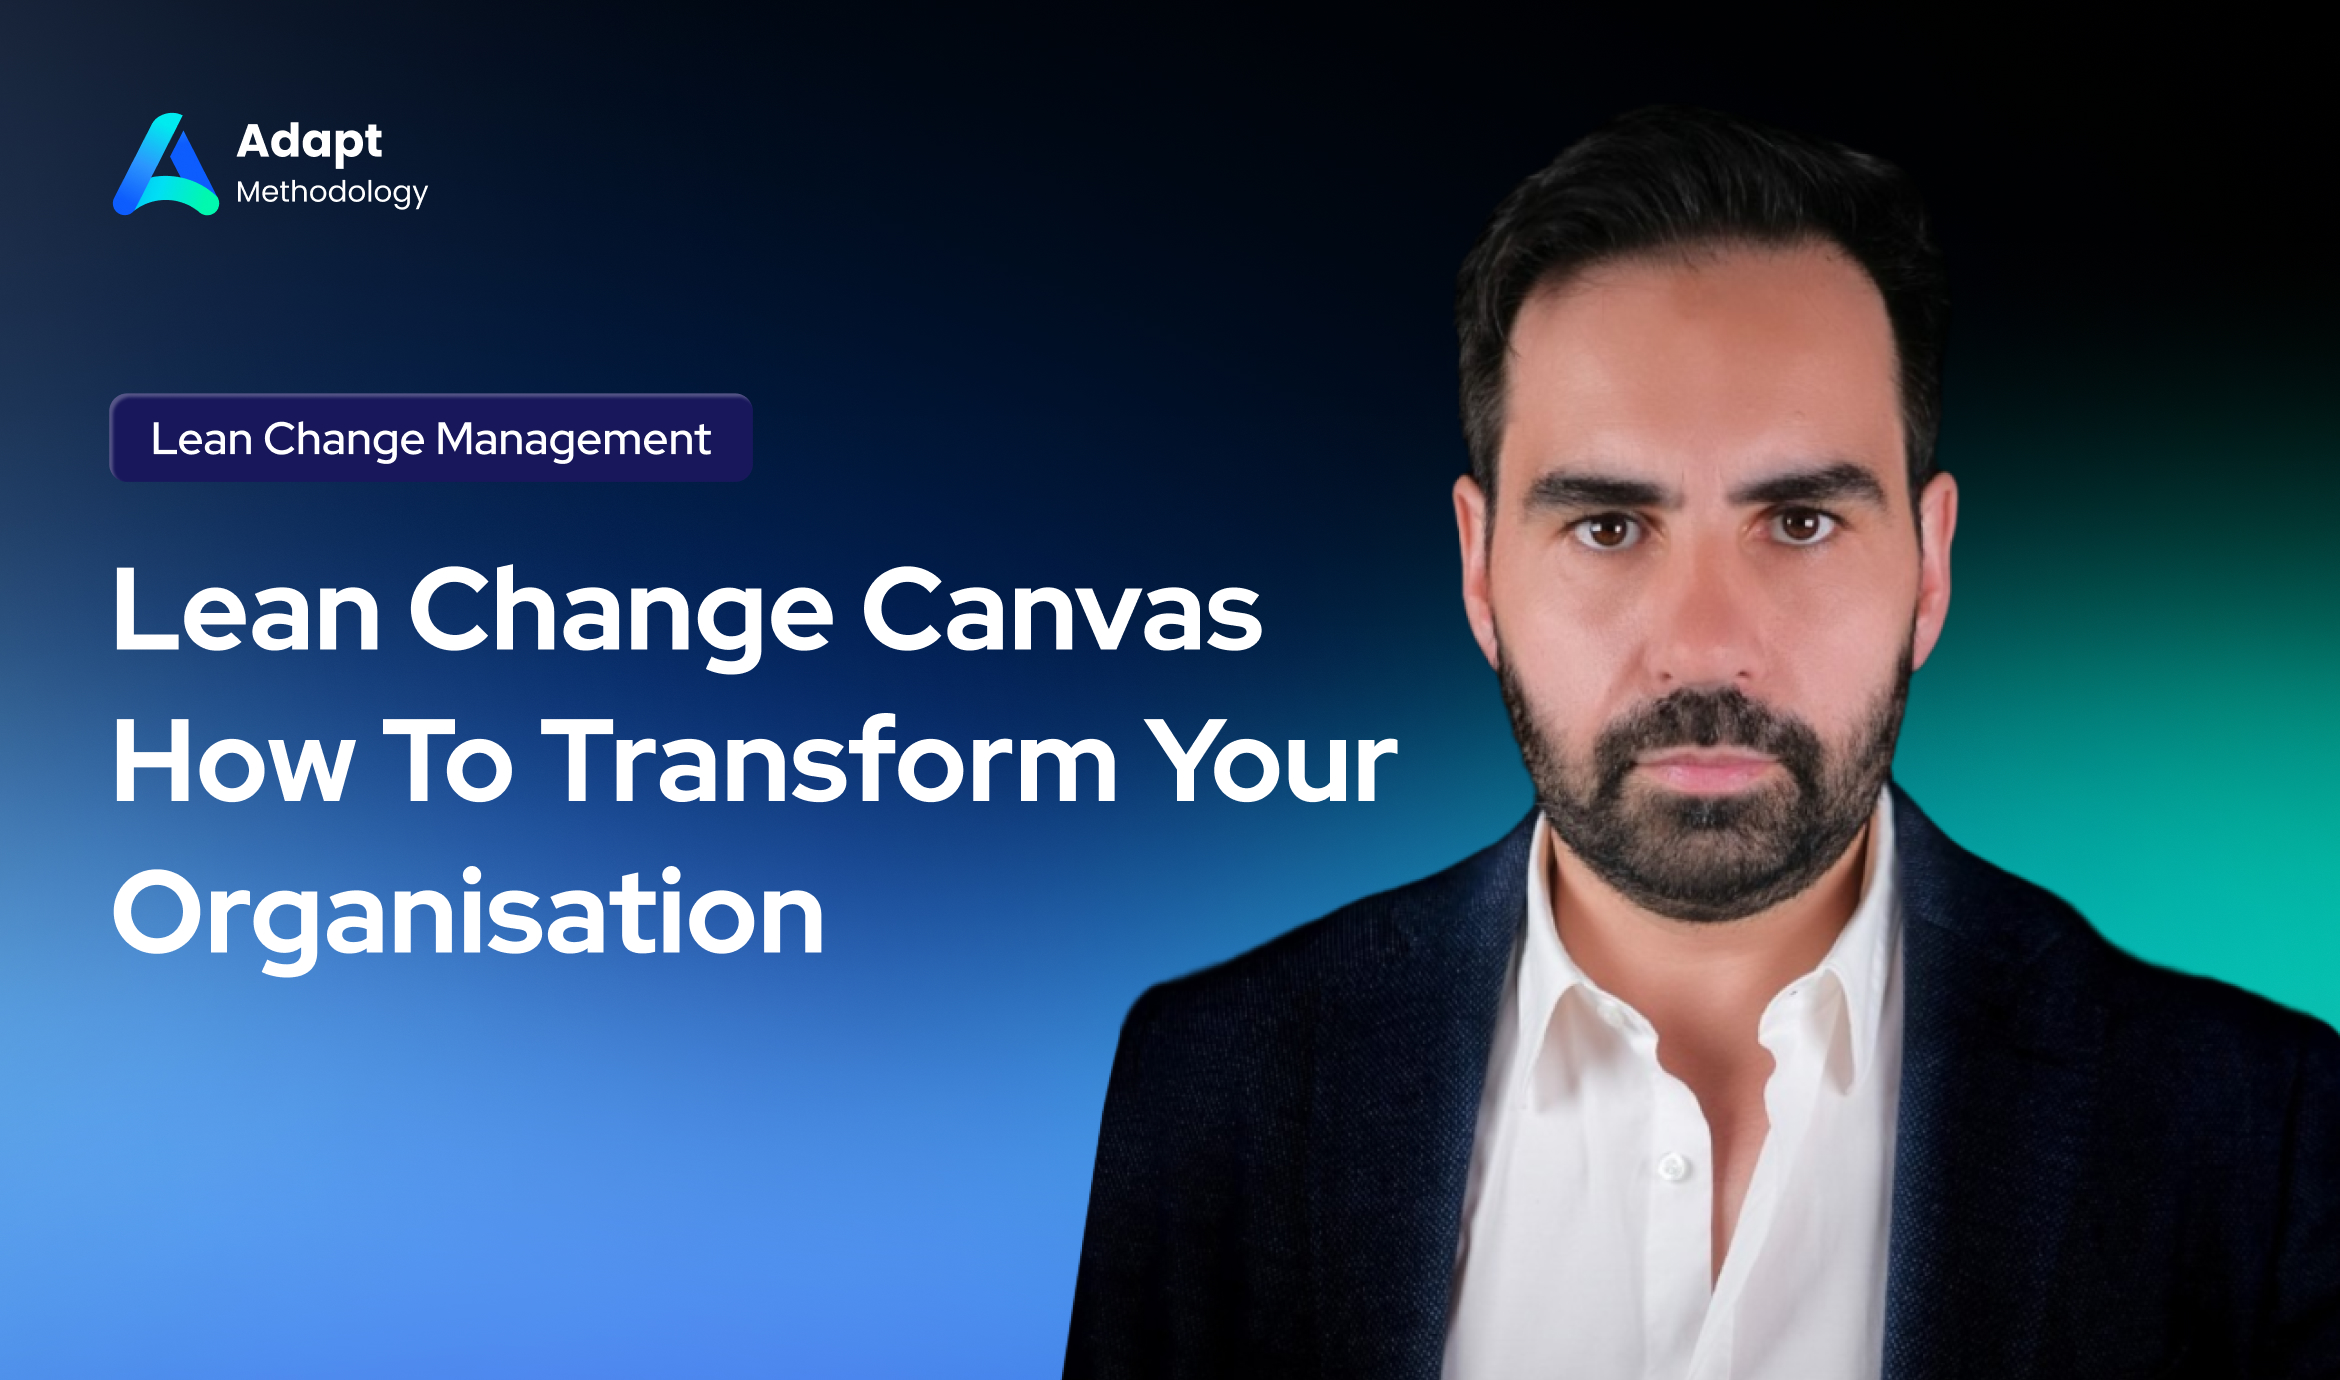 Lean Change Canvas - How To Transform Your Organisation